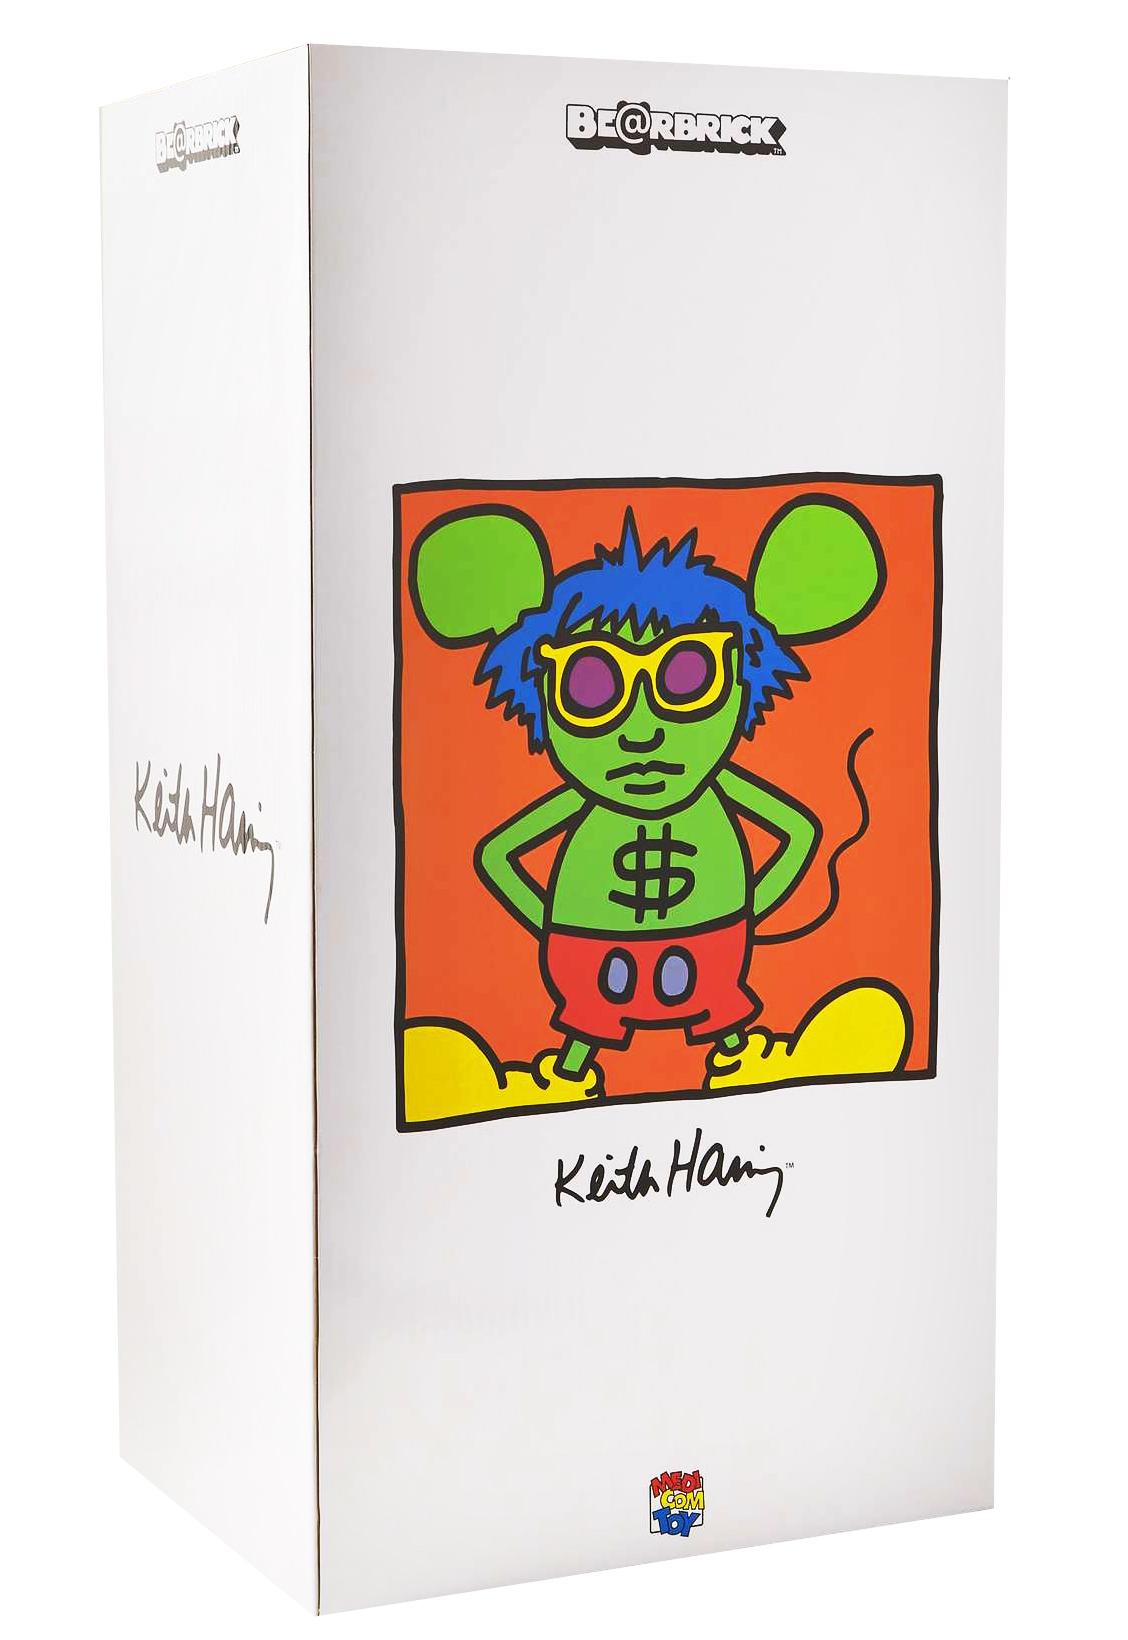 Andy Mouse Bearbrick 400 % von Keith Haring, Andy Mouse  (Haring Warhol BE@RBRICK) (Pop-Art), Sculpture, von (after) Keith Haring